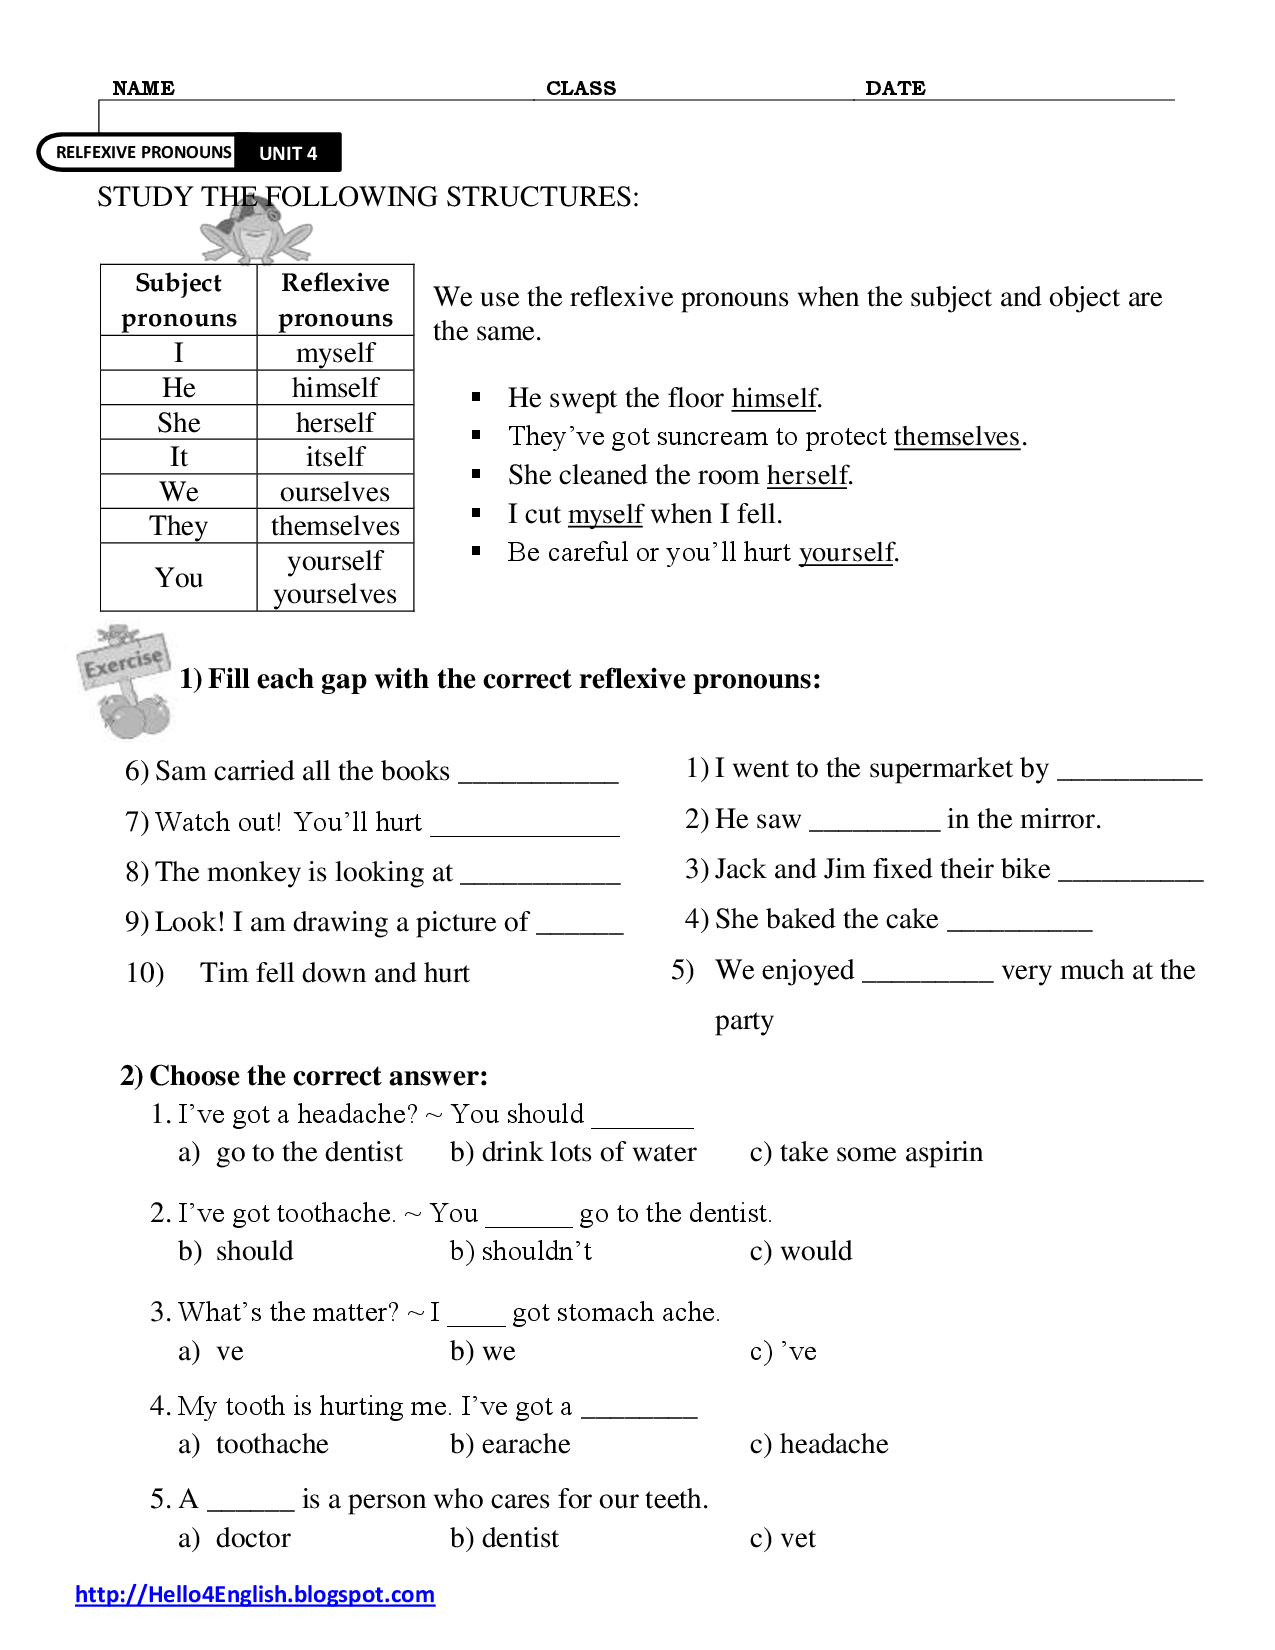 13 Best Images Of Intensive Pronouns Worksheets Reflexive Pronouns Worksheet Reflexive And